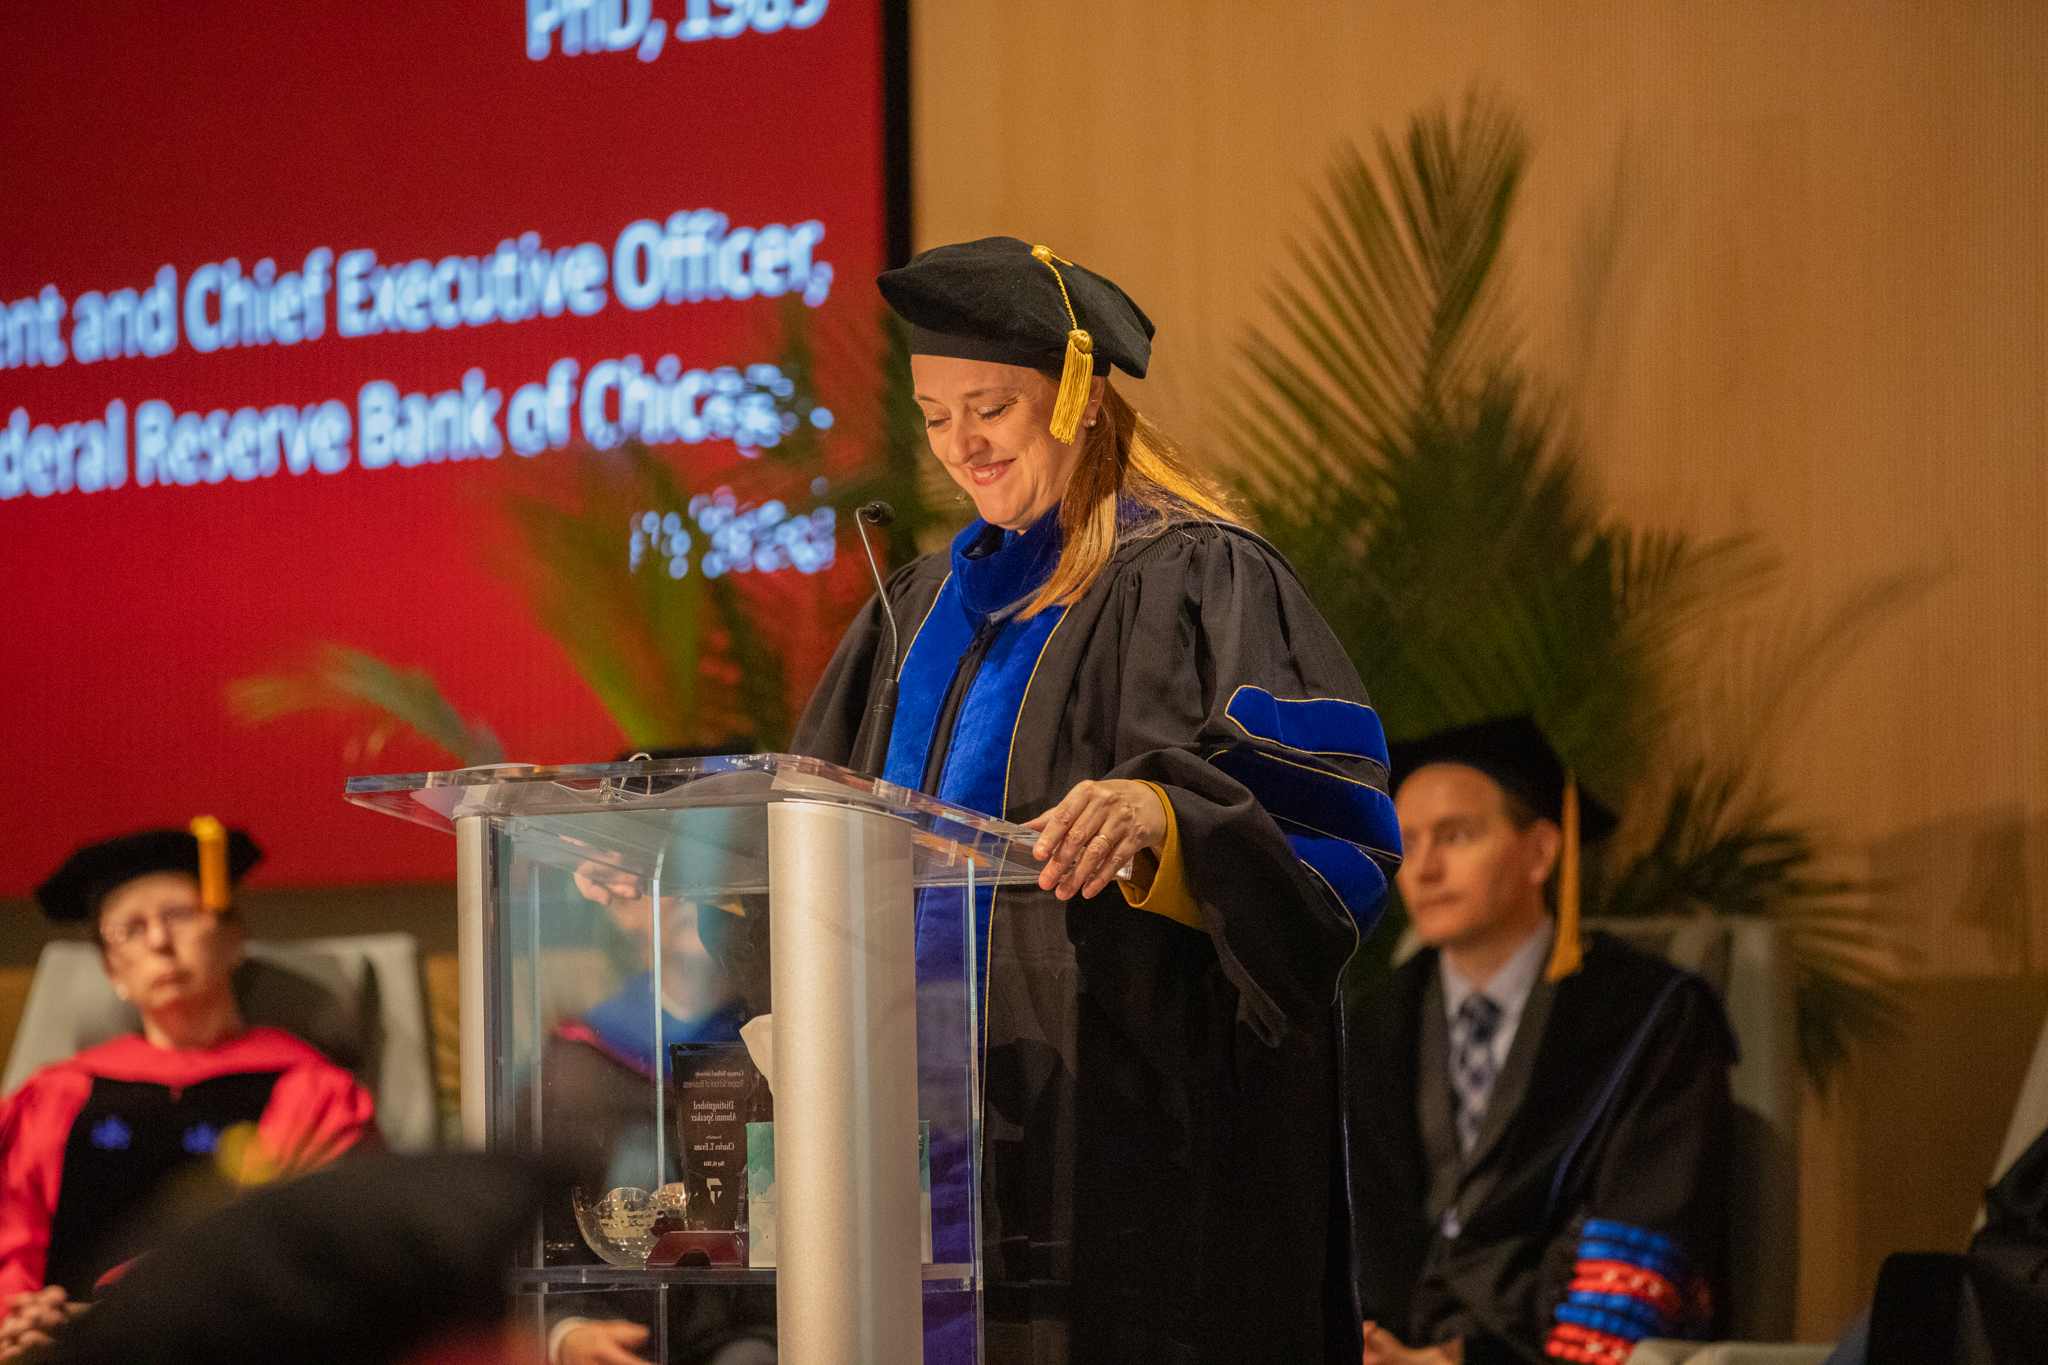 Dean and Richard P. Simmons Professor of Finance Isabelle Bajeux-Besnainou smiled as she delivered a ceremonial speech at the Ph.D. diploma ceremony on May 10.